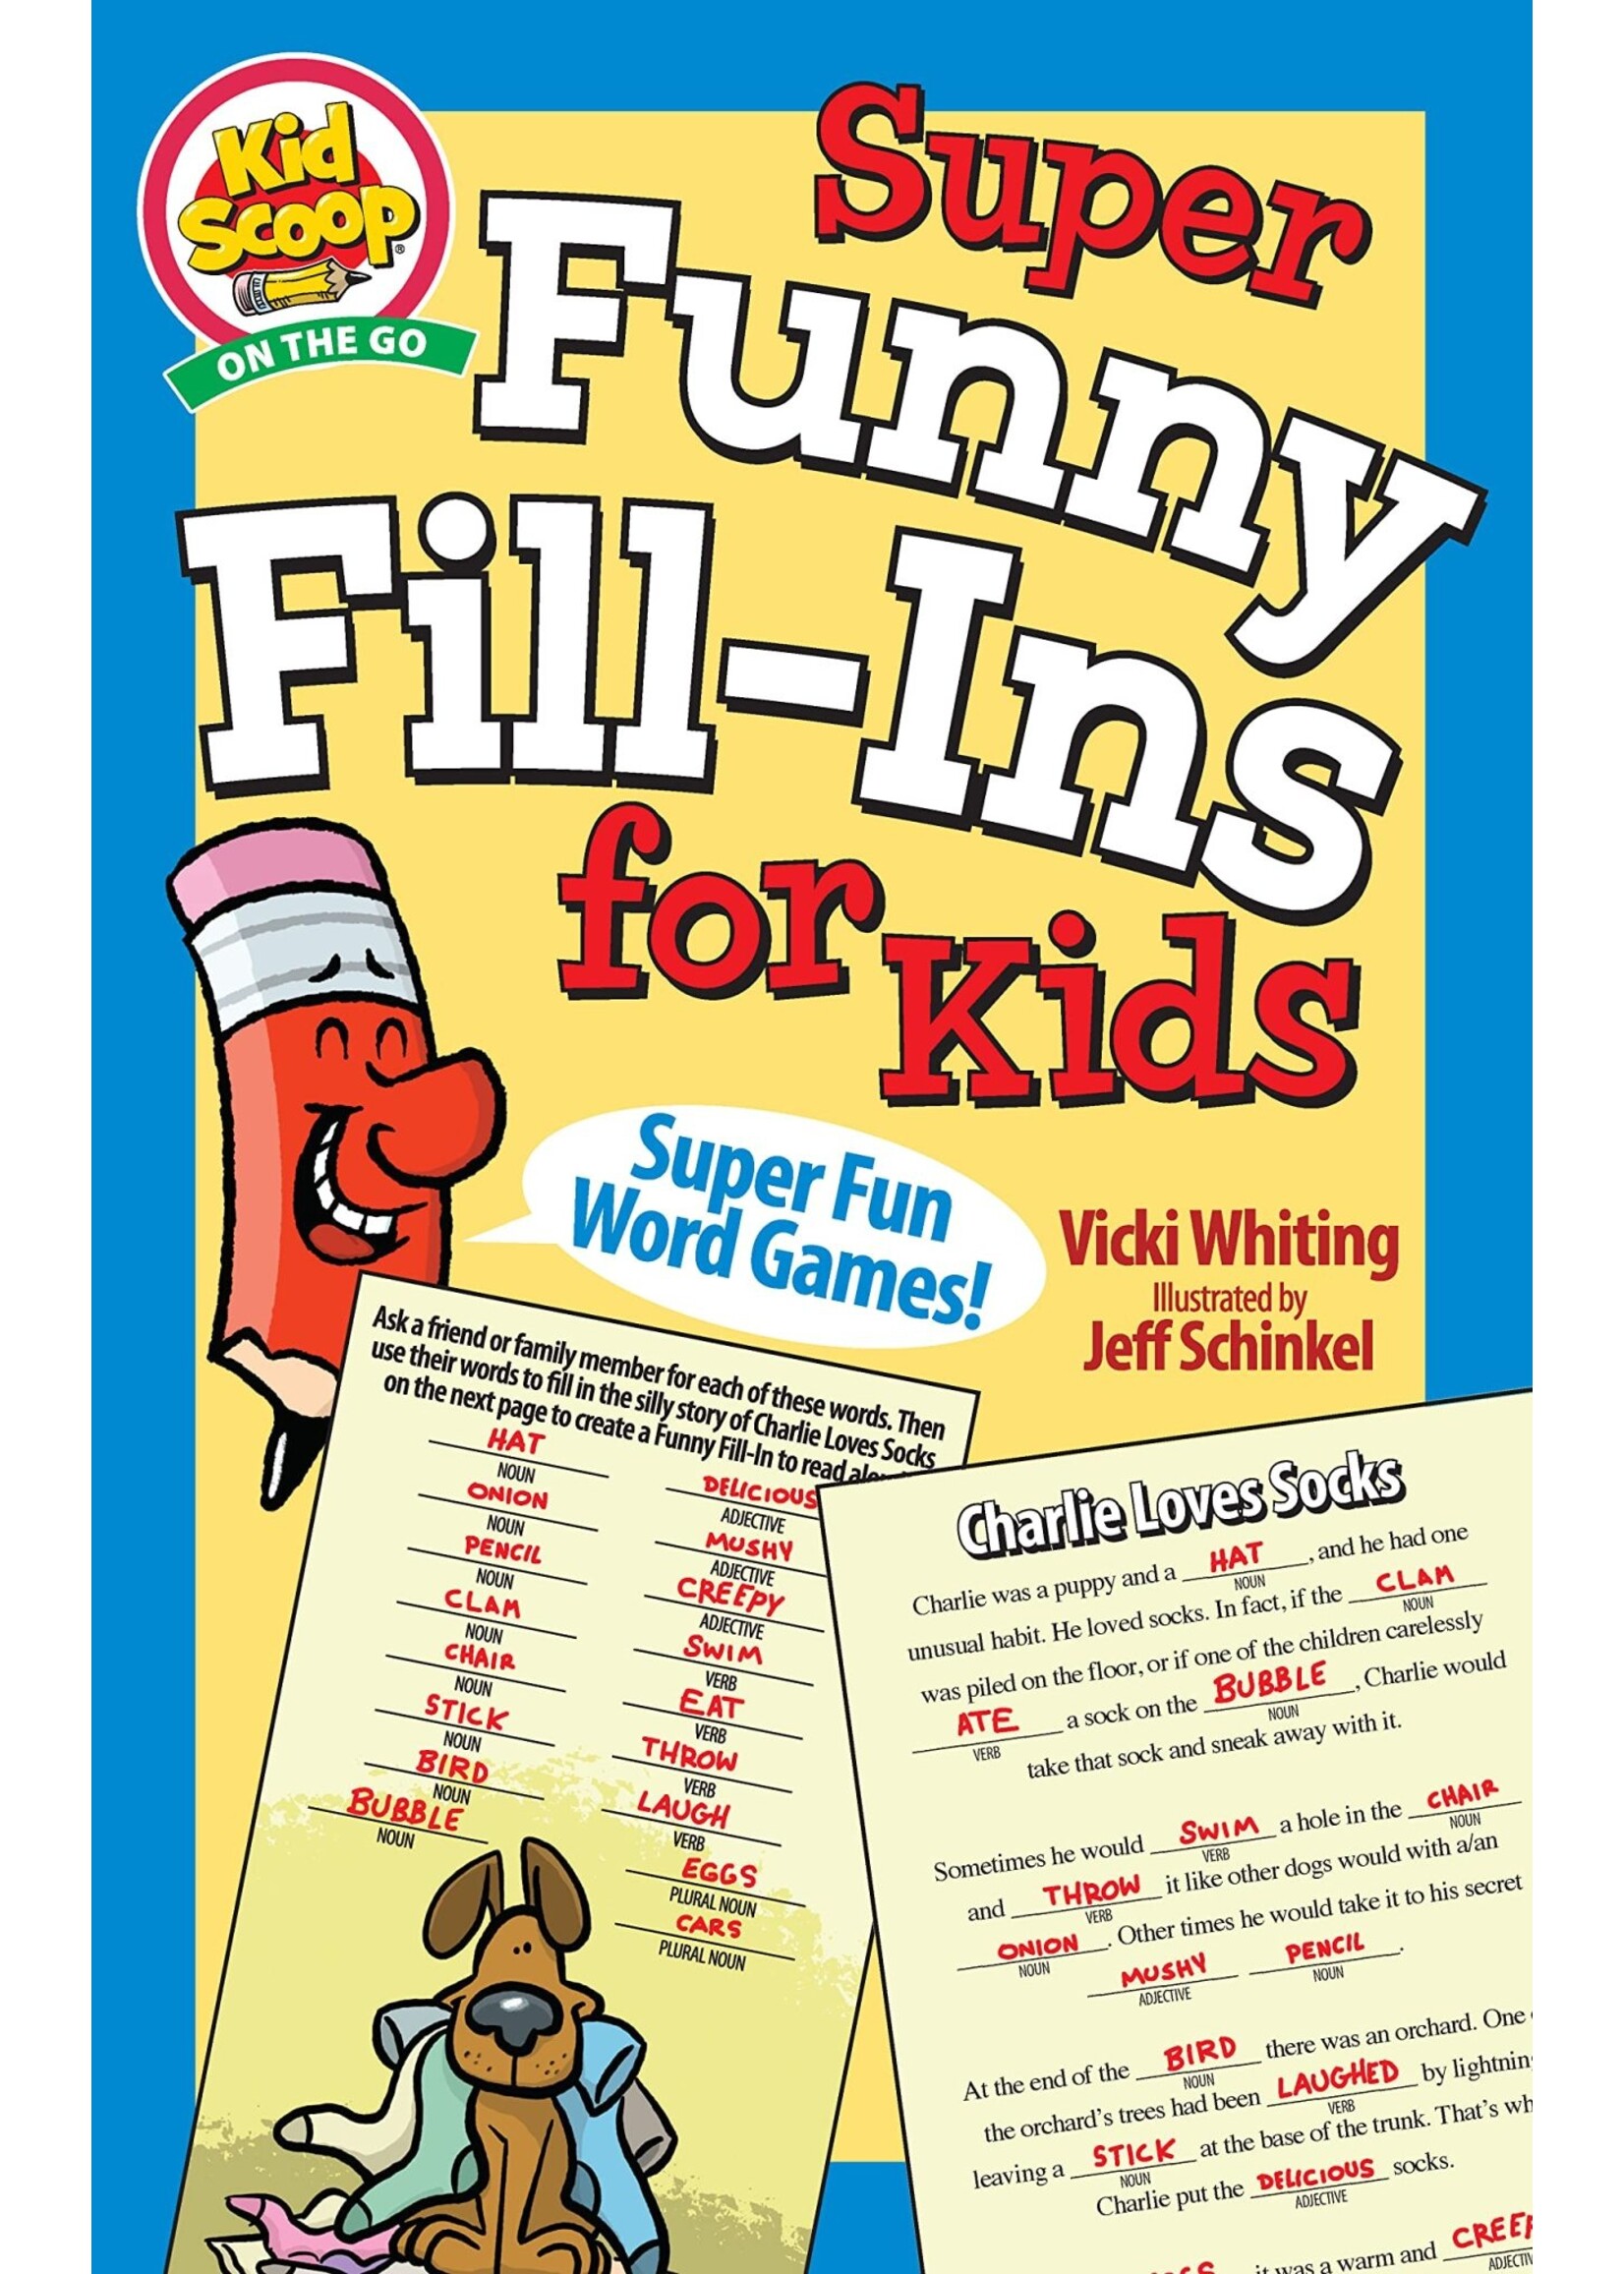 Super Funny Fill-Ins for Kids by Vicki Whiting, Jeff Schinkel